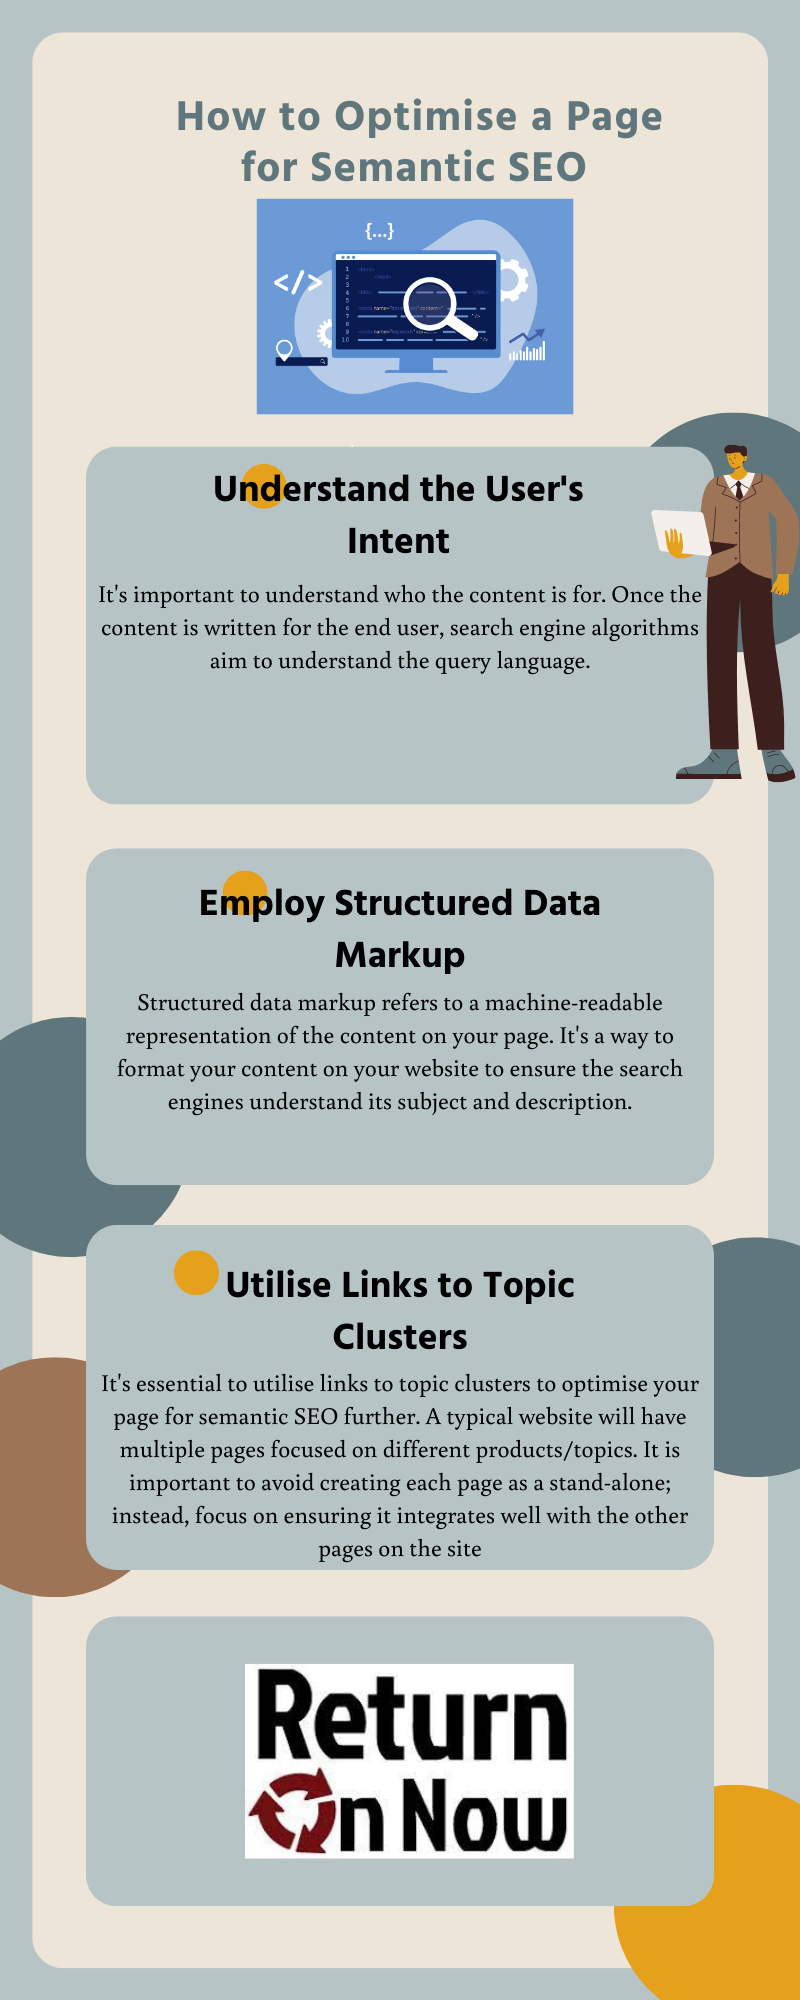 INFOGRAPHIC: How to Optimize a Page for Semantic SEO